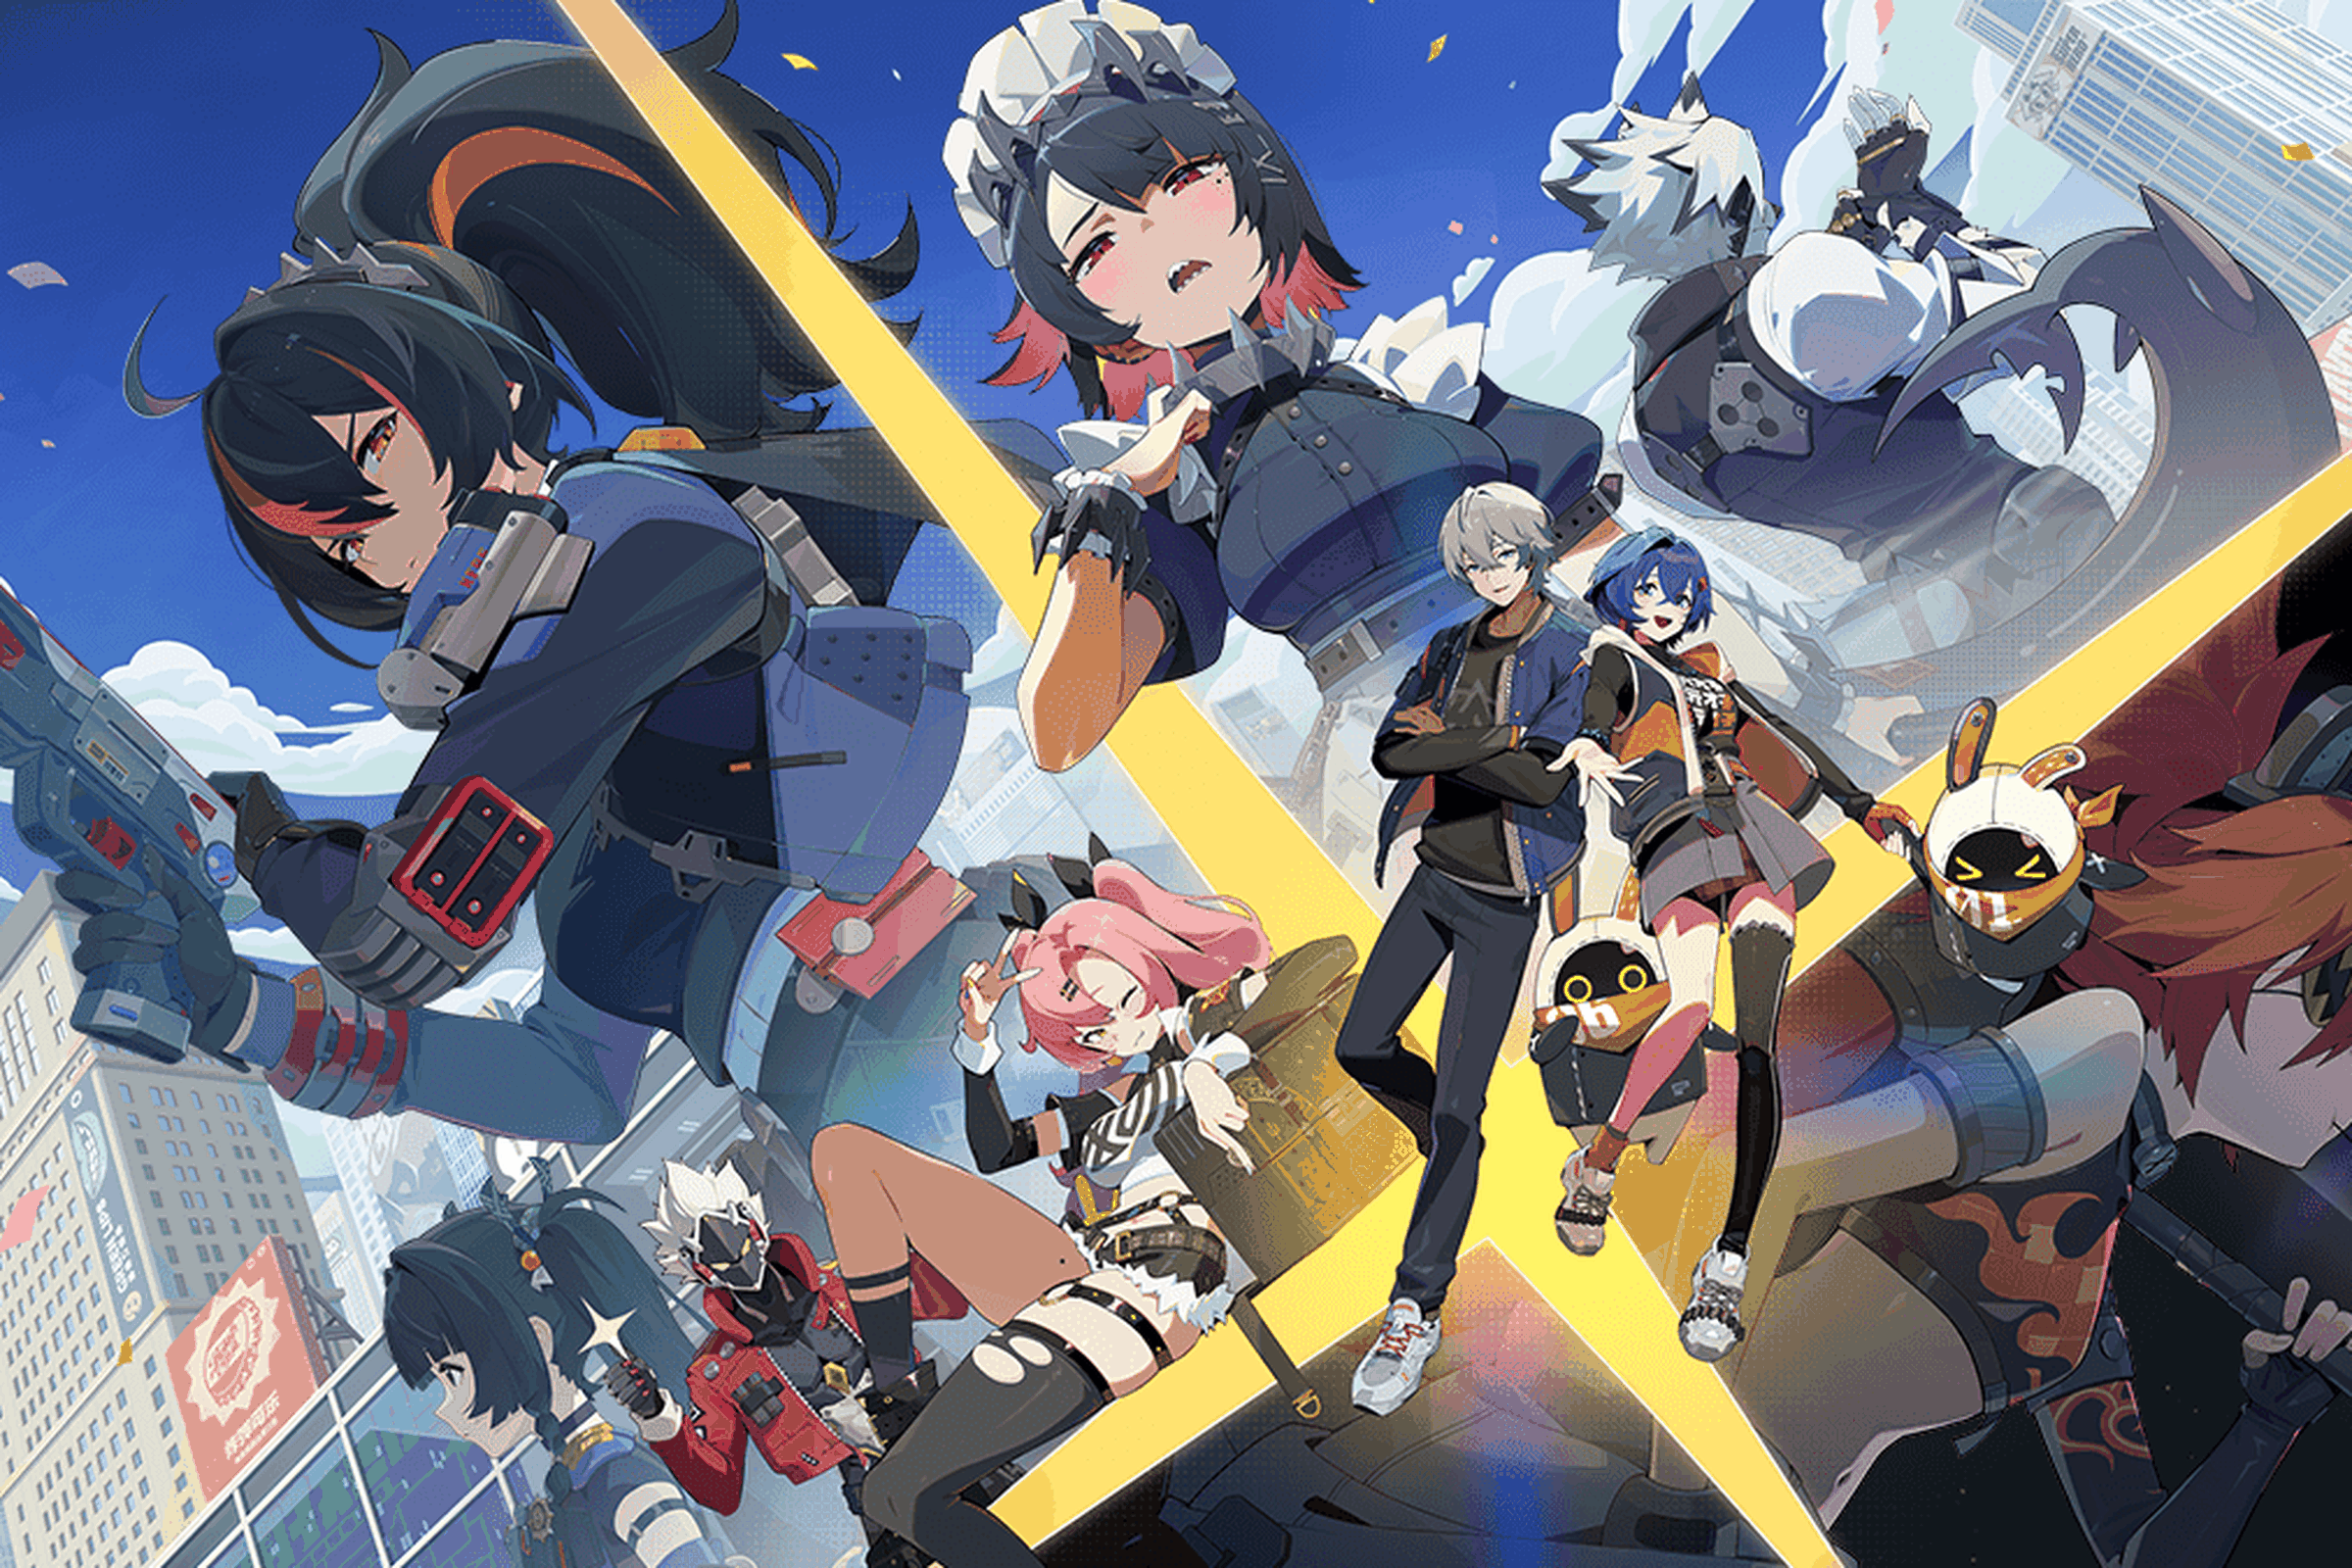 Key art from Zenless Zone Zero featuring a collage of characters against an urban landscape